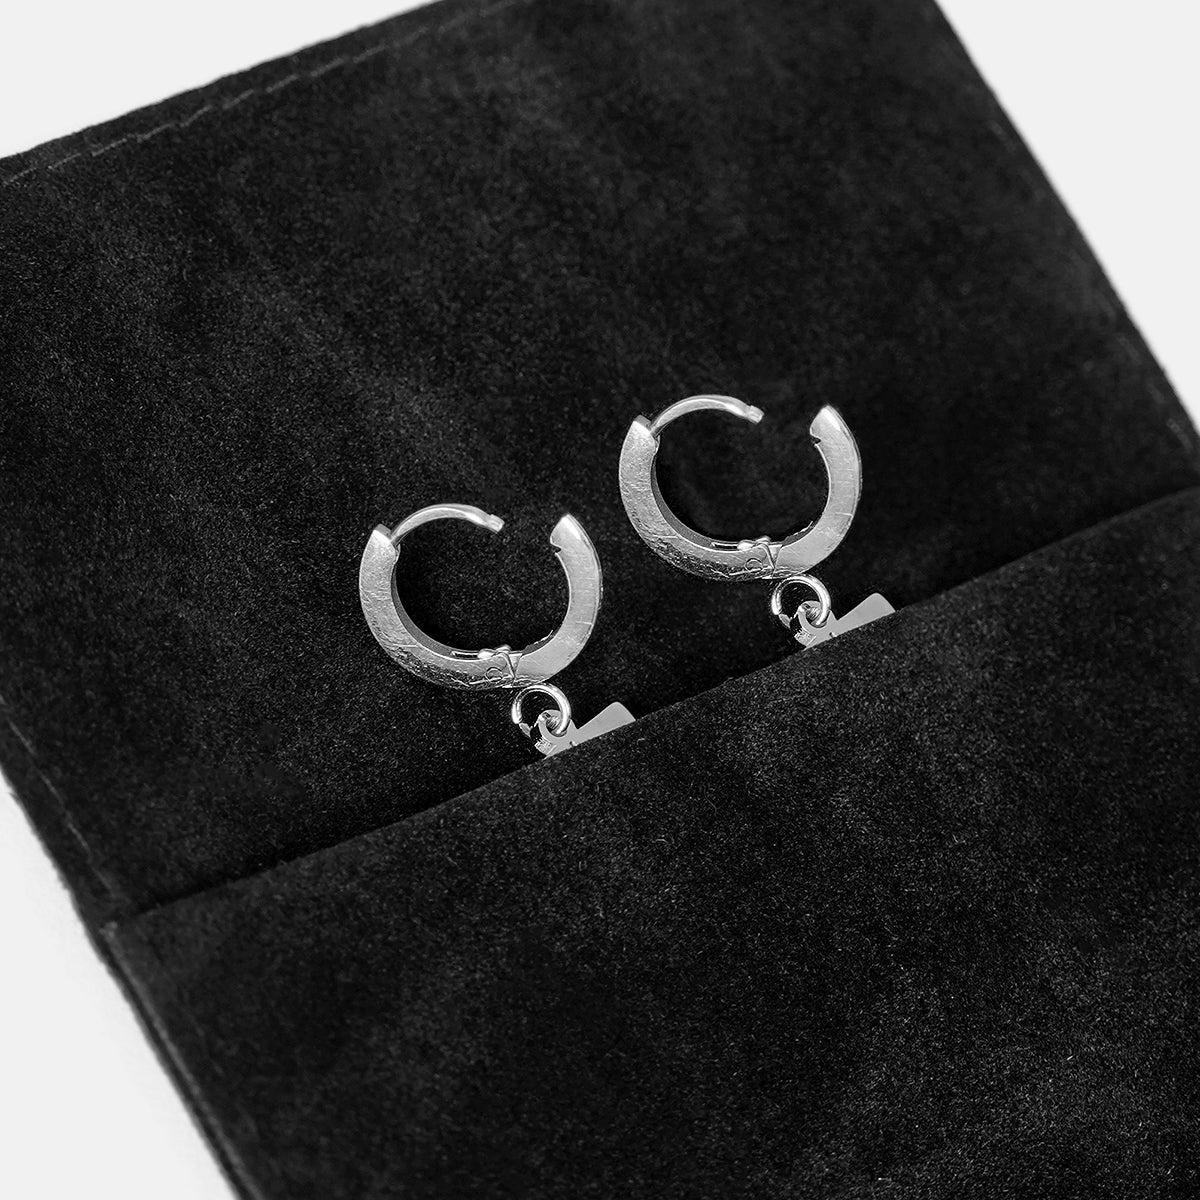 23 Number Earring - Stainless Steel